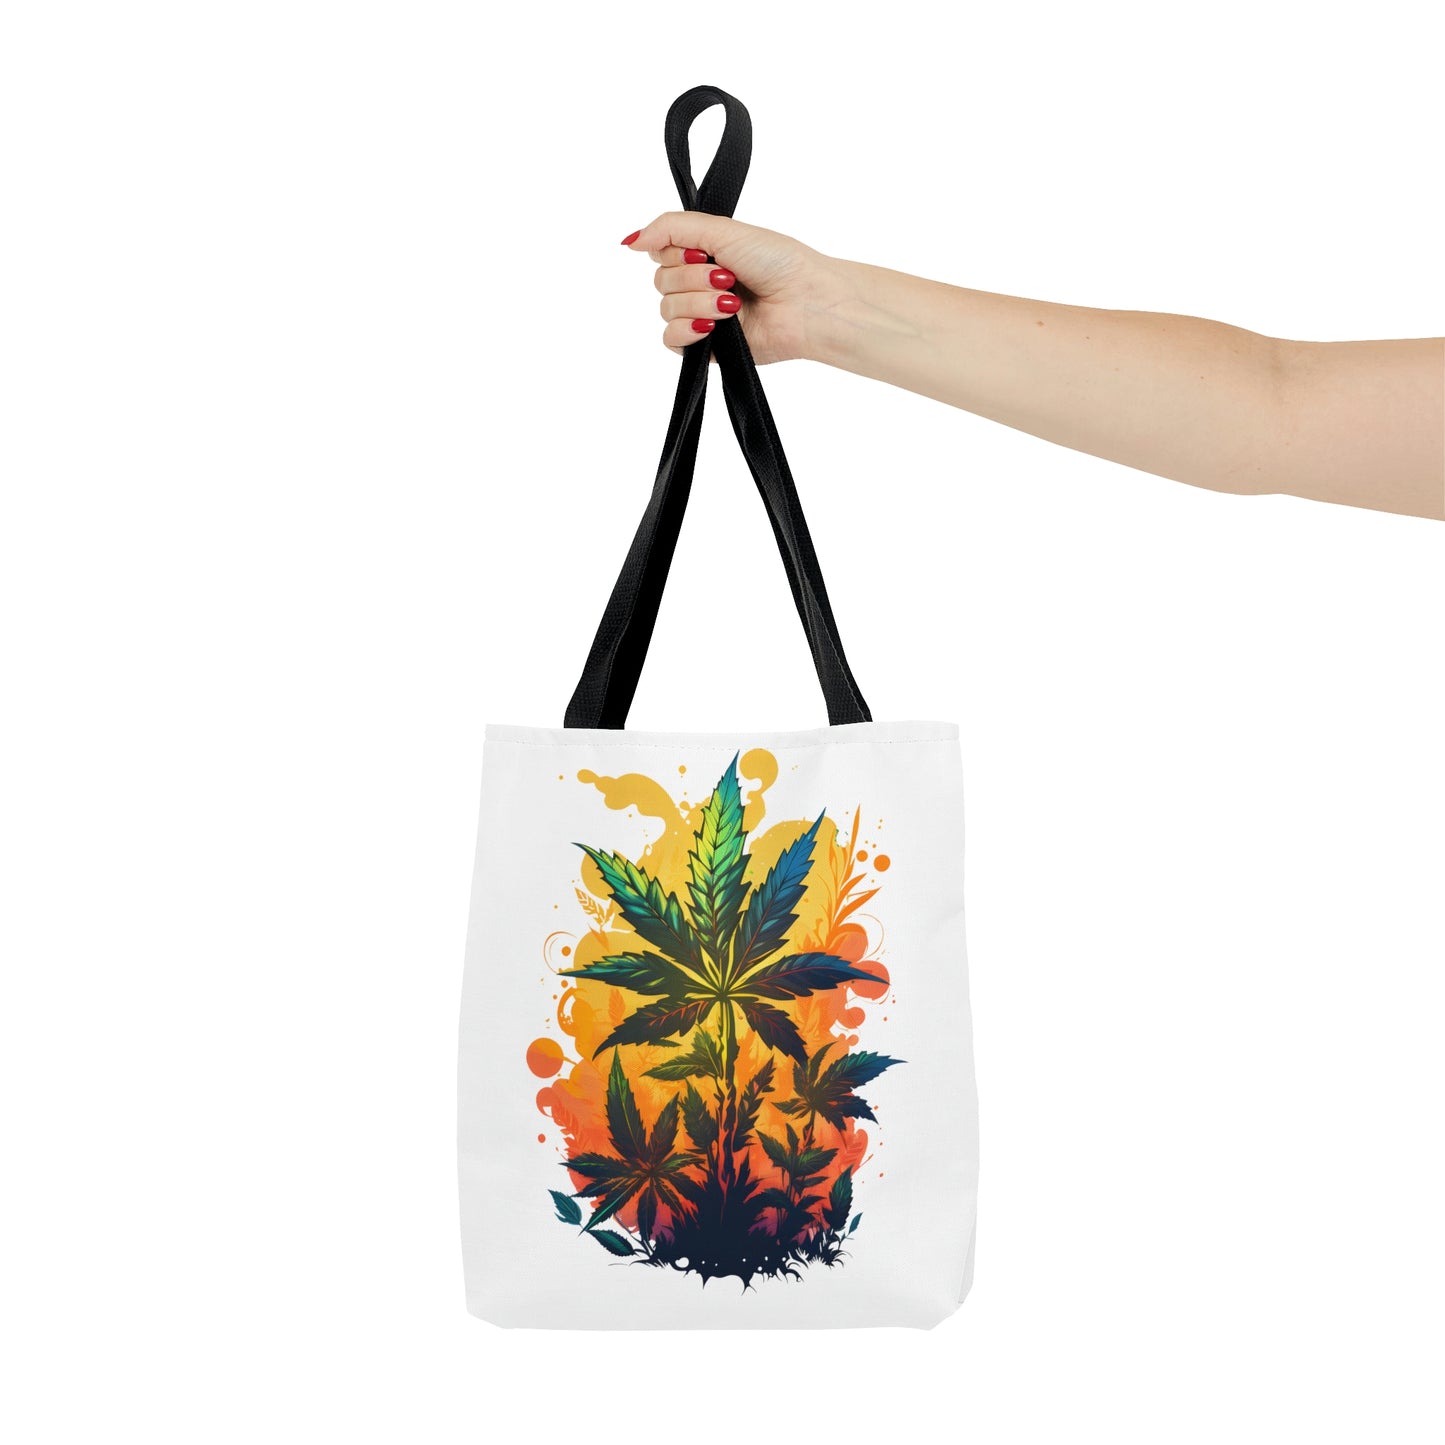 The Cannabis Warm Paradise Tote Bag is being held out in front to give a clear view of the graphic on front